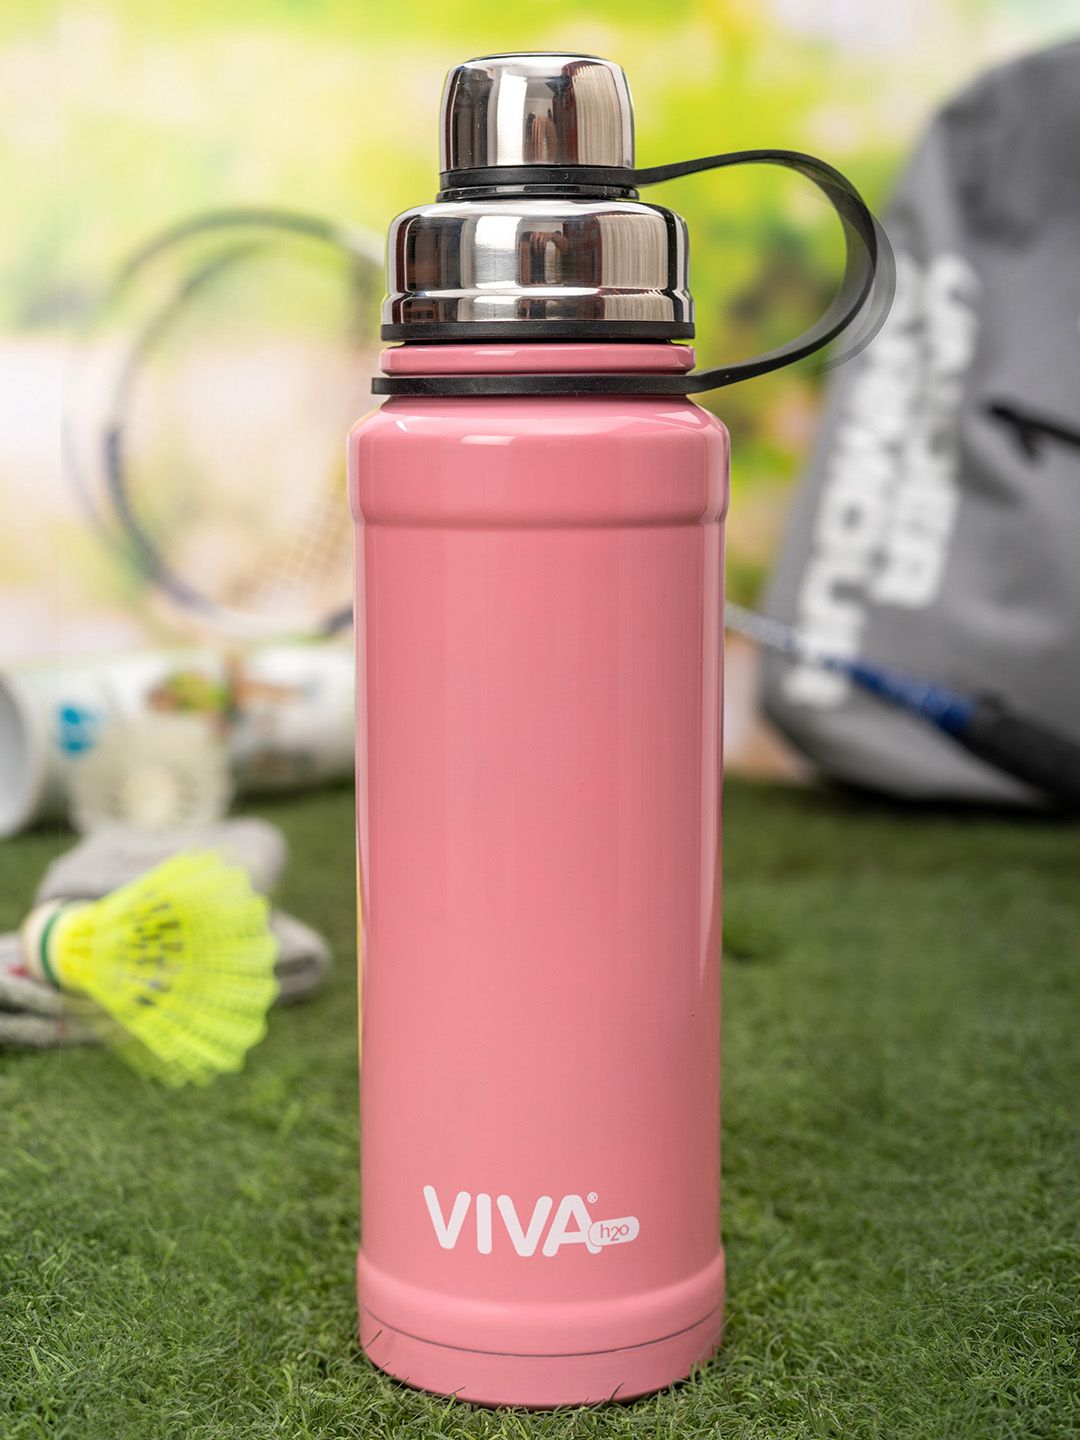 VIVA h2o Unisex Pink Solid Double Wall Stainless Steel Vaccum Insulated Water Bottle Price in India